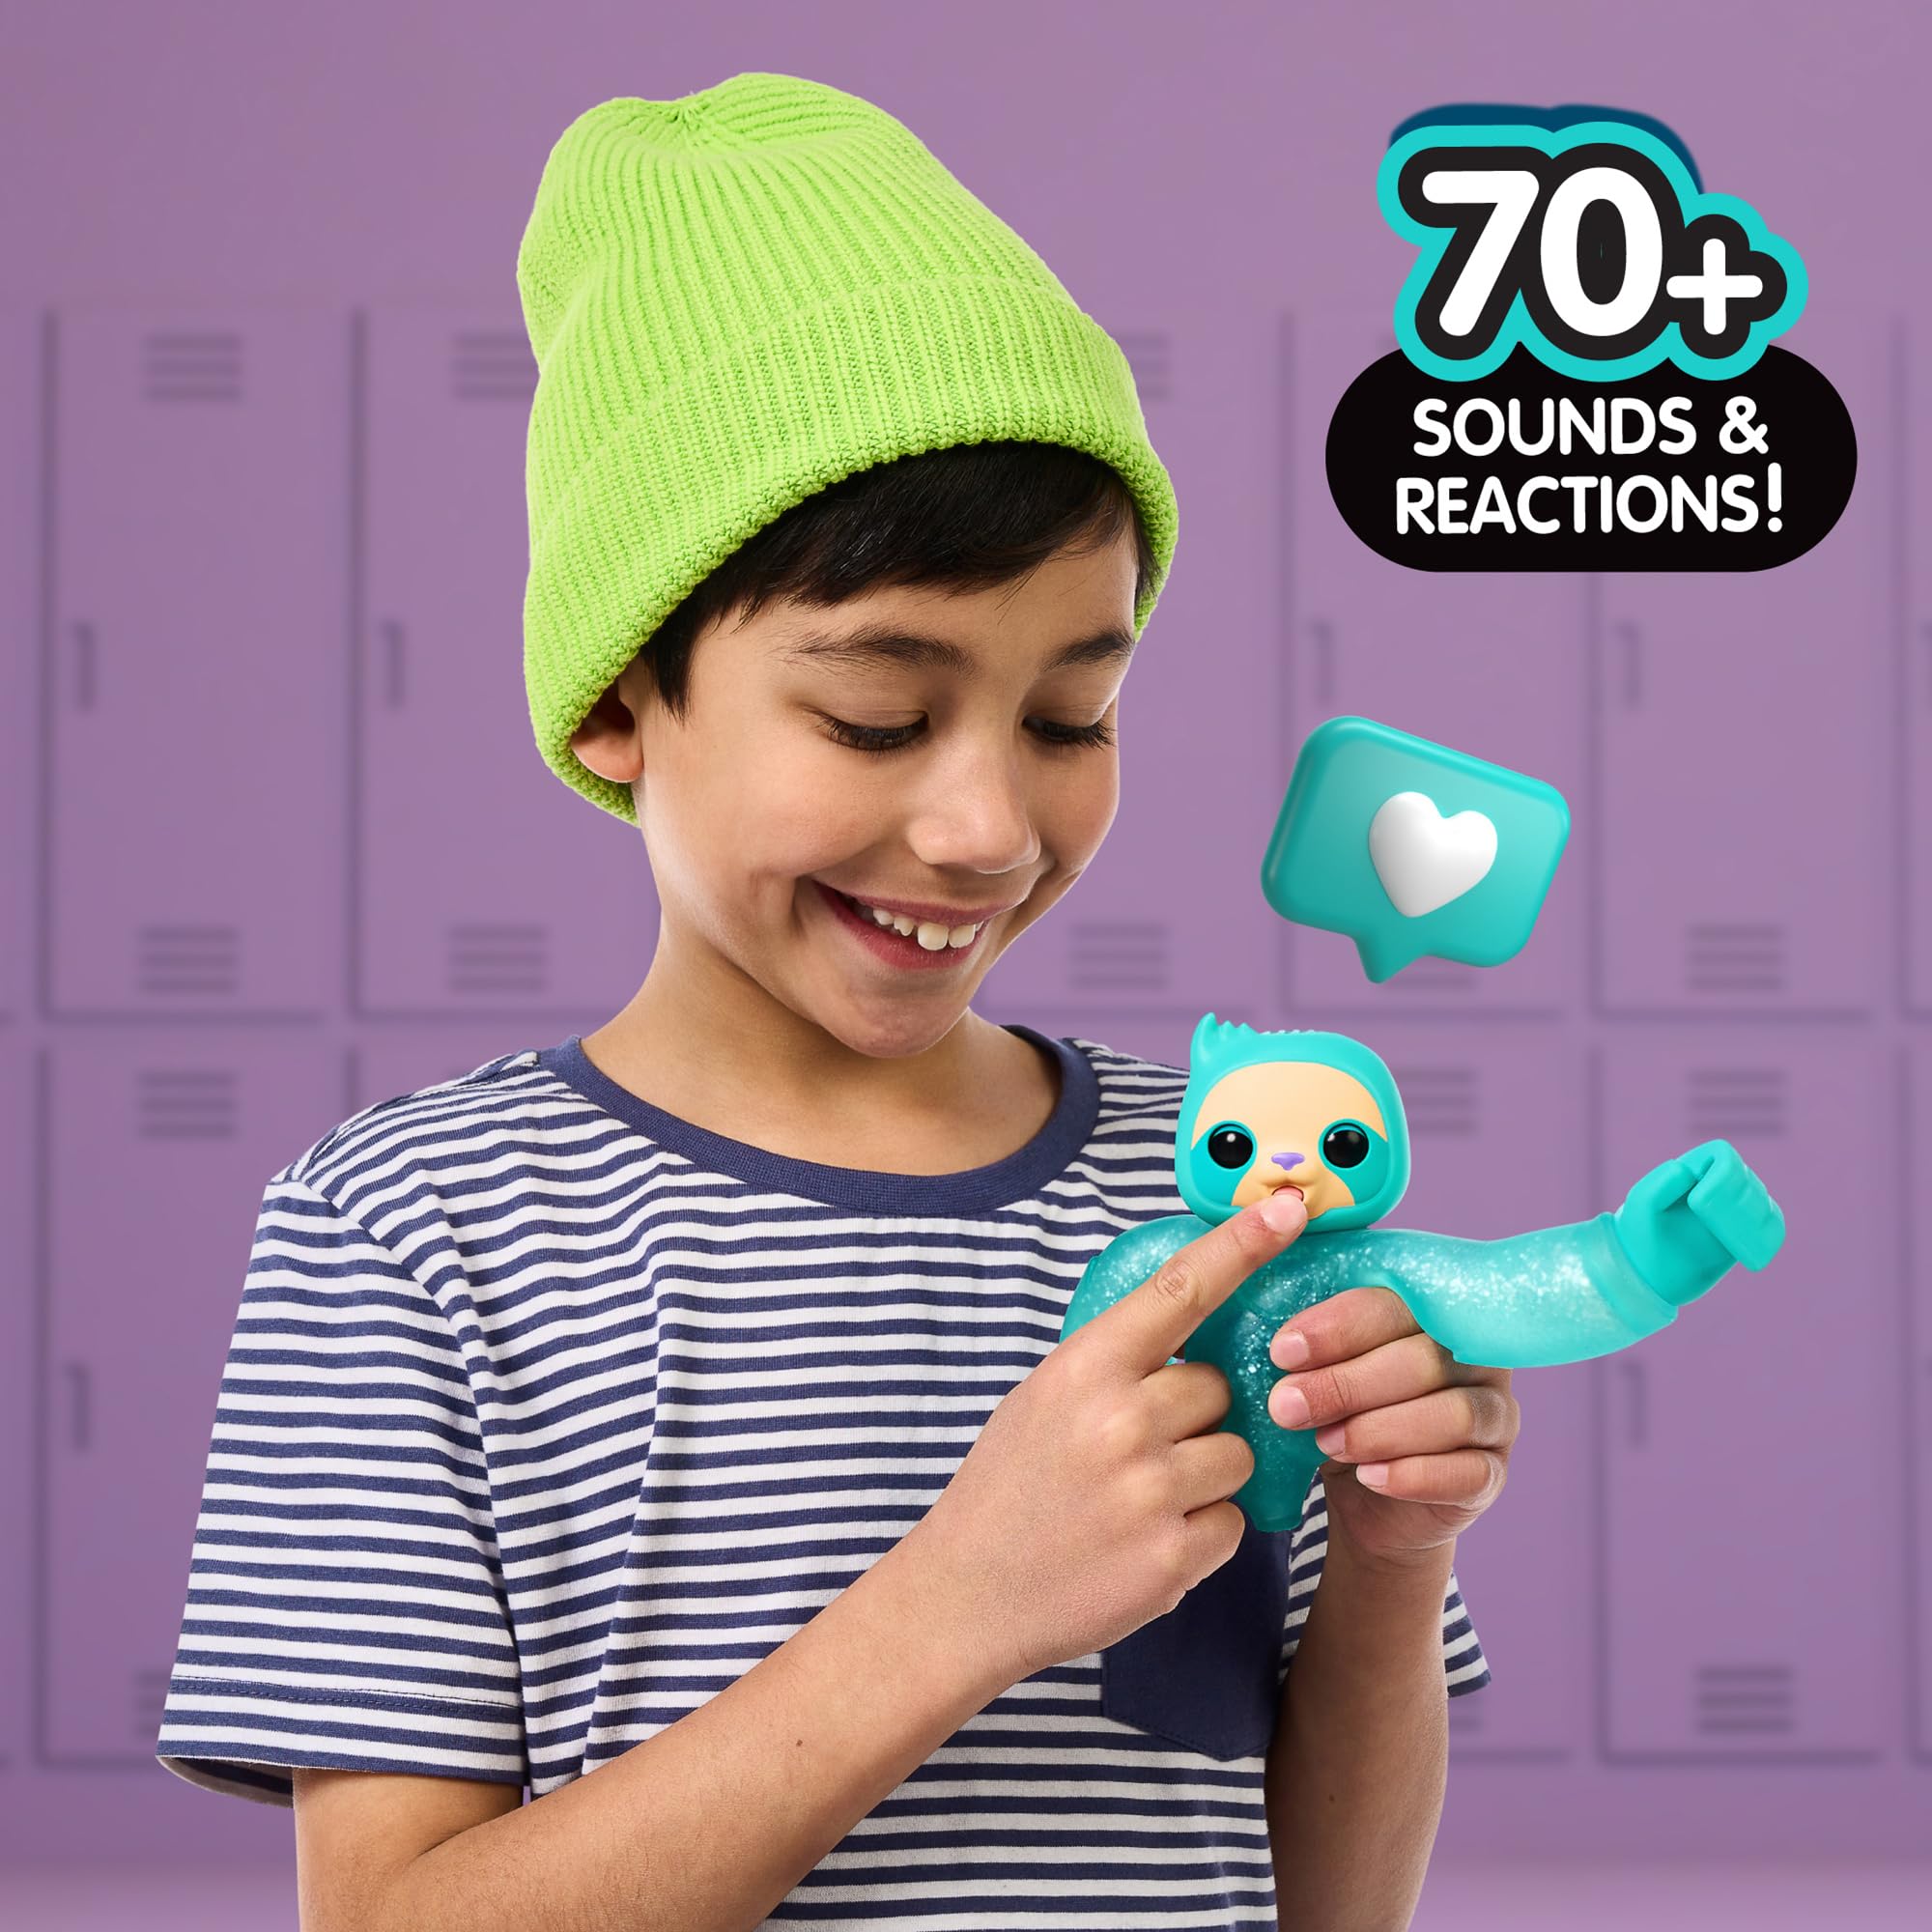 Little Live Pets Hug n' Hang Zoogooz - Sensoo Sloth. an Interactive Electronic Squishy Stretchy Toy Pet with 70+ Sounds & Reactions. Stretch, Squish and Link Their Hands